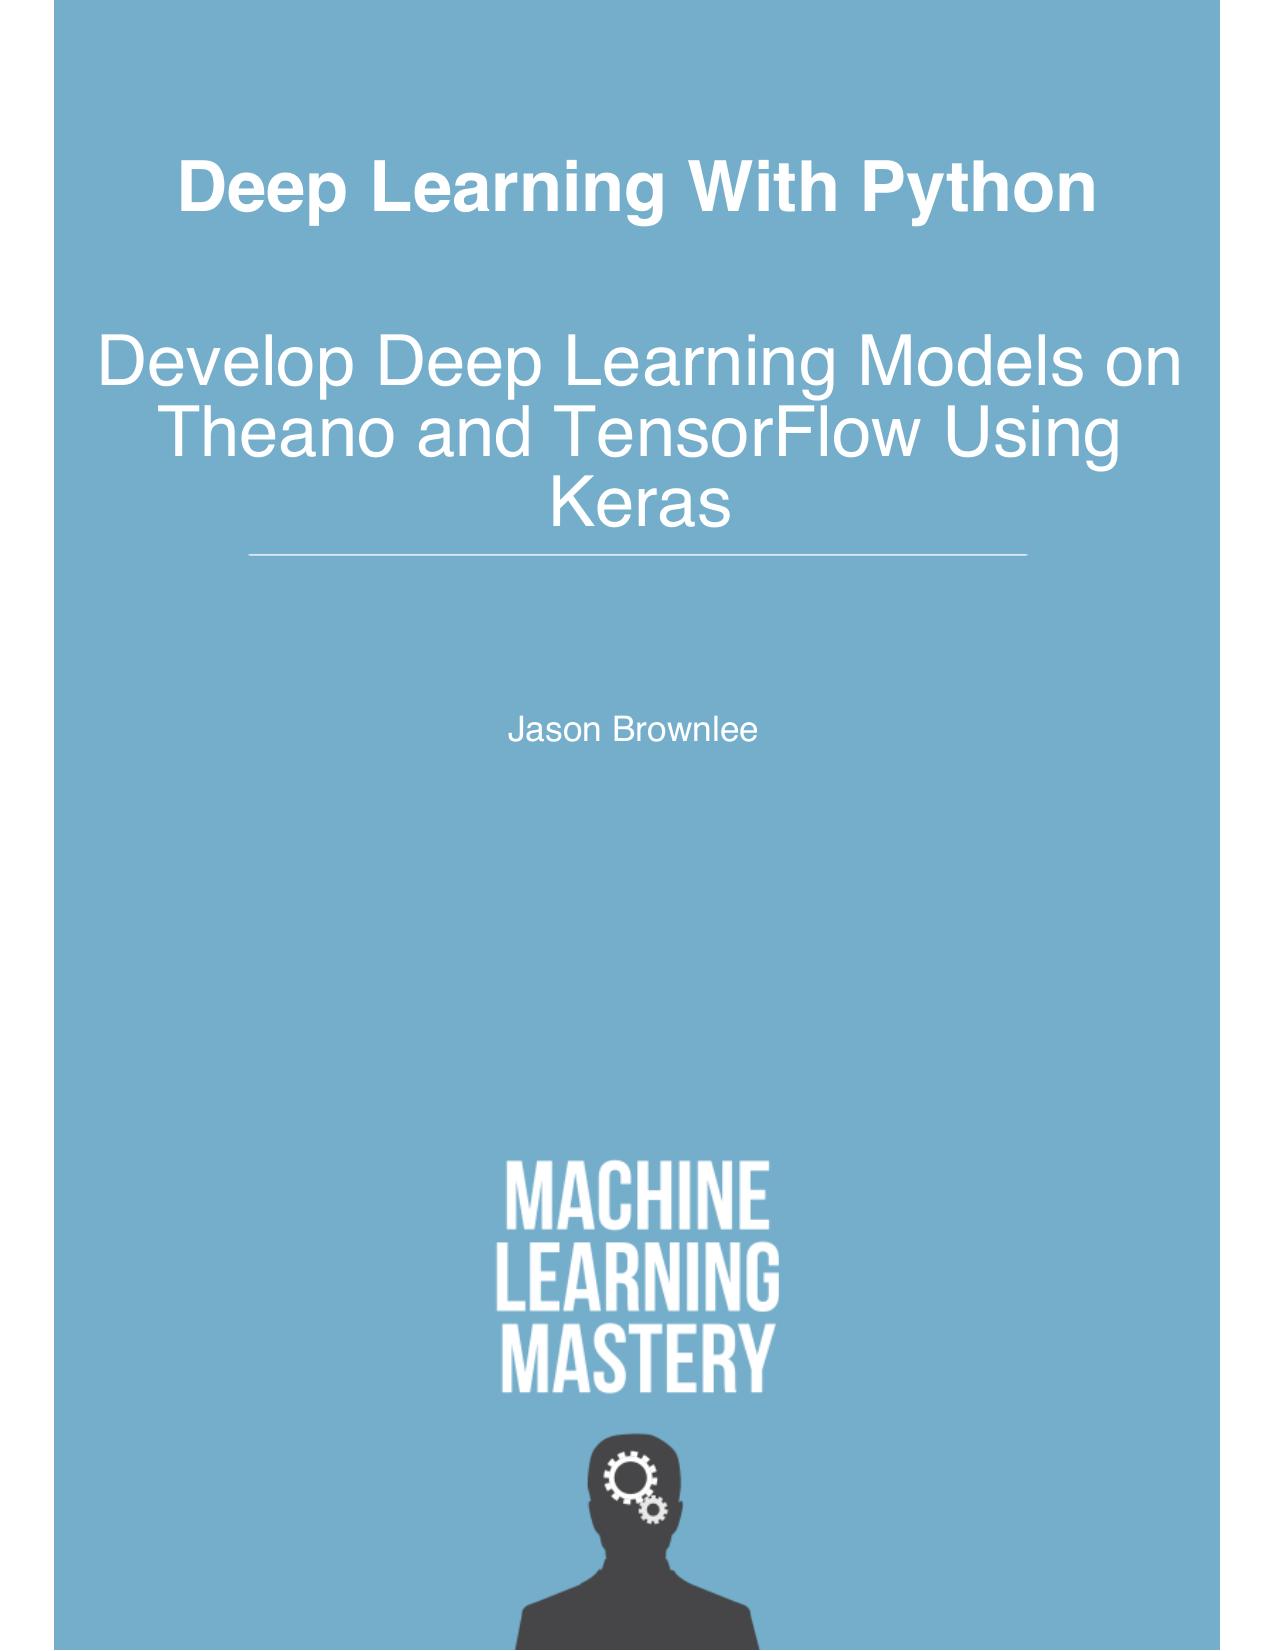 Deep Learning with Python - Develop Deep Learning Models on Theano and TensorFlow using Keras